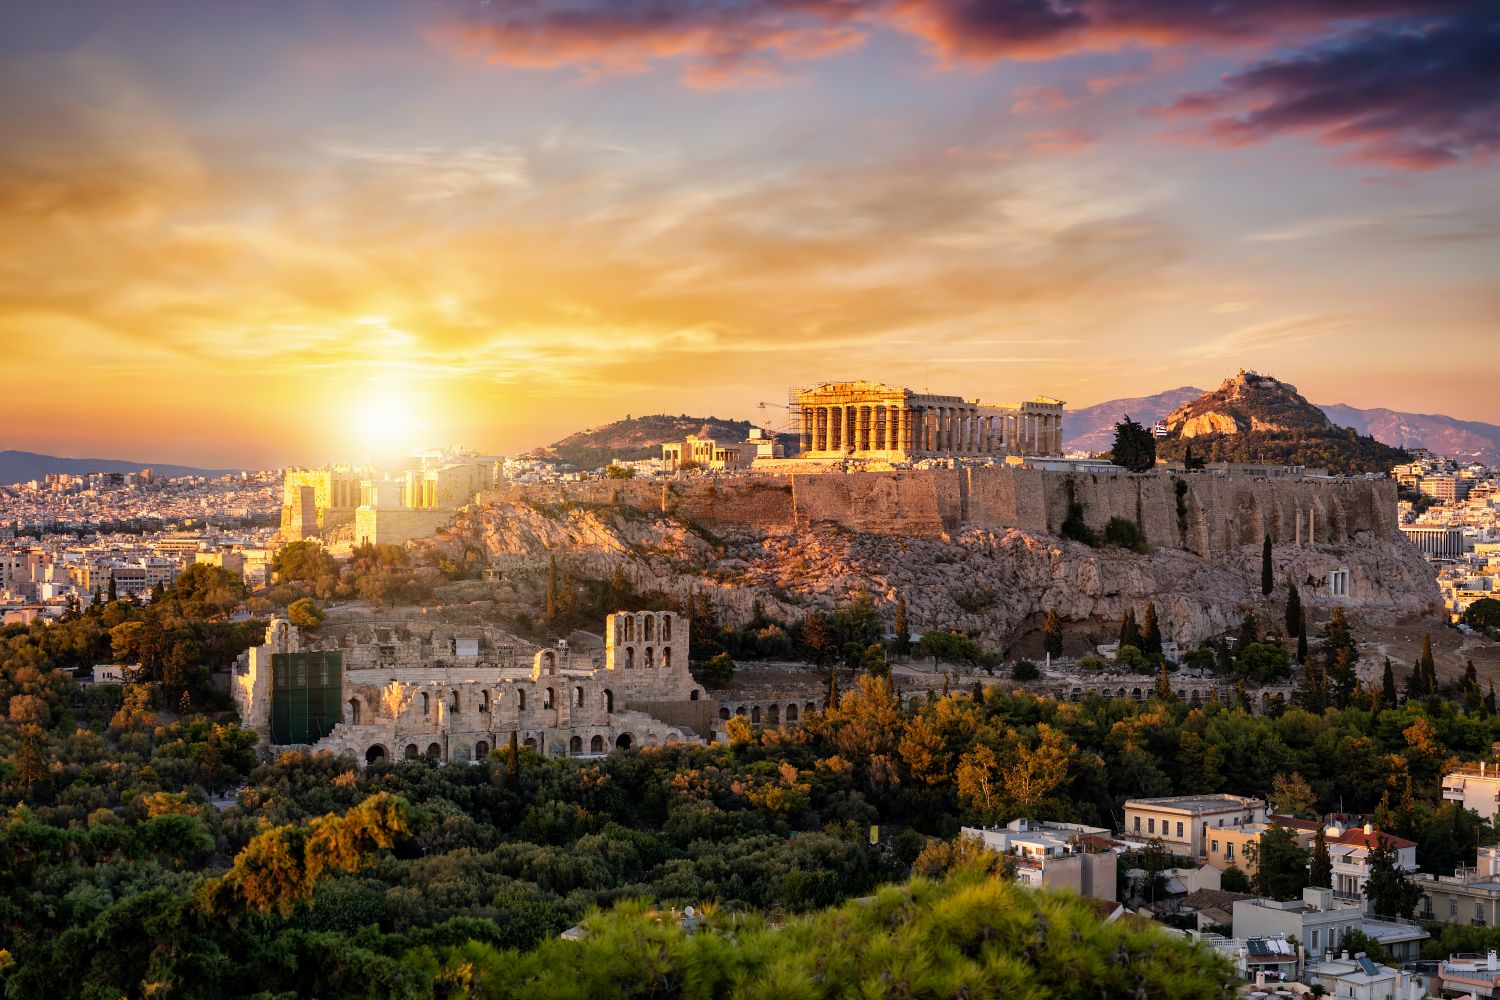 Acropolis Of Athens, Athens, Greece – Heritage site since 1987